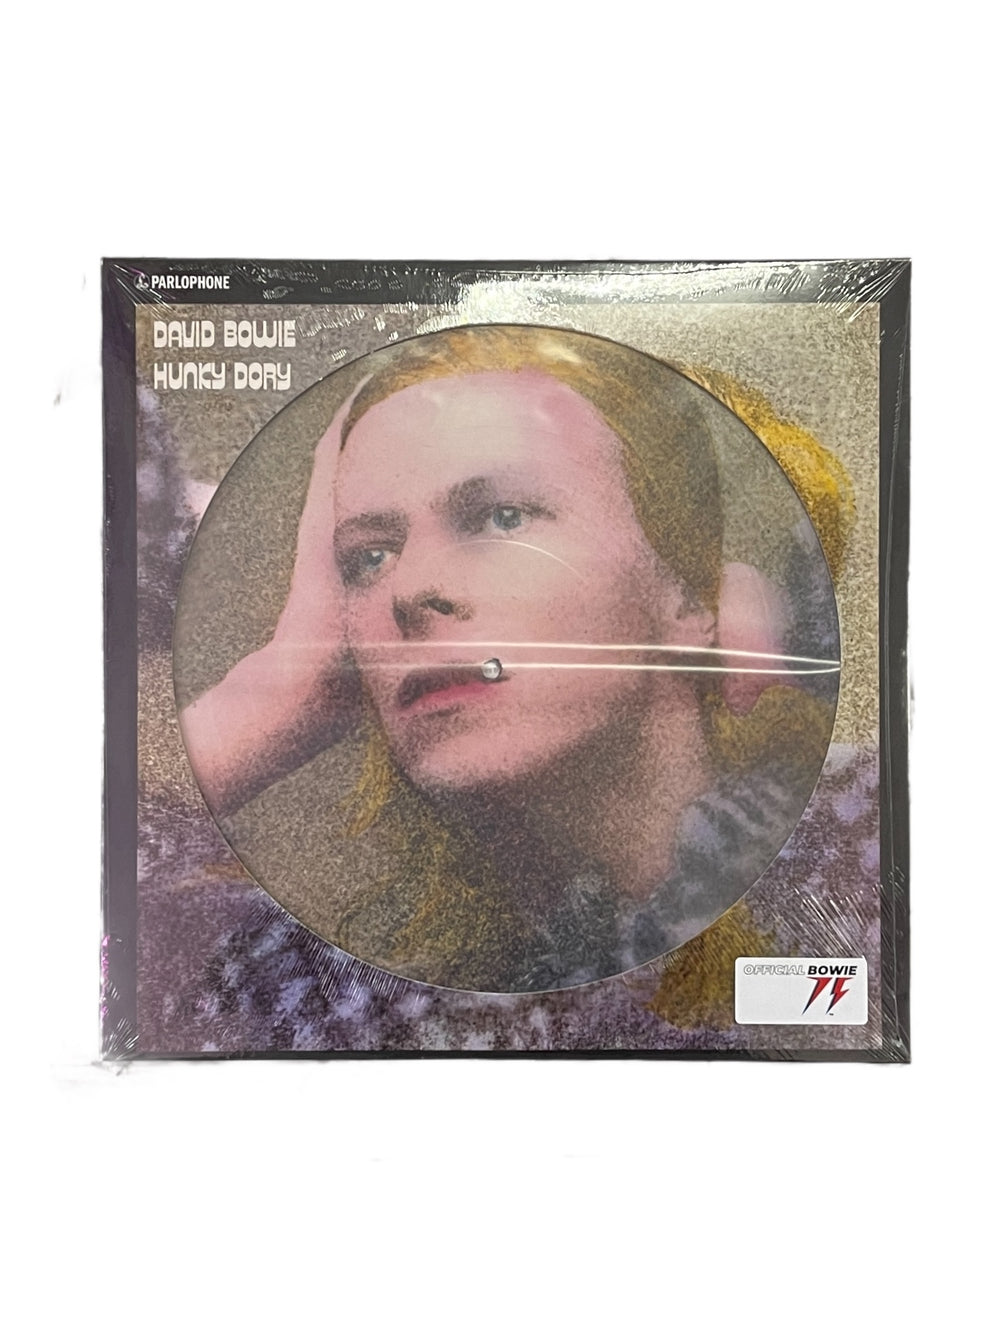 David Bowie ‘Hunky Dory (50th Anniversary Picture Disc)’ INSTOCK SEALED NEW